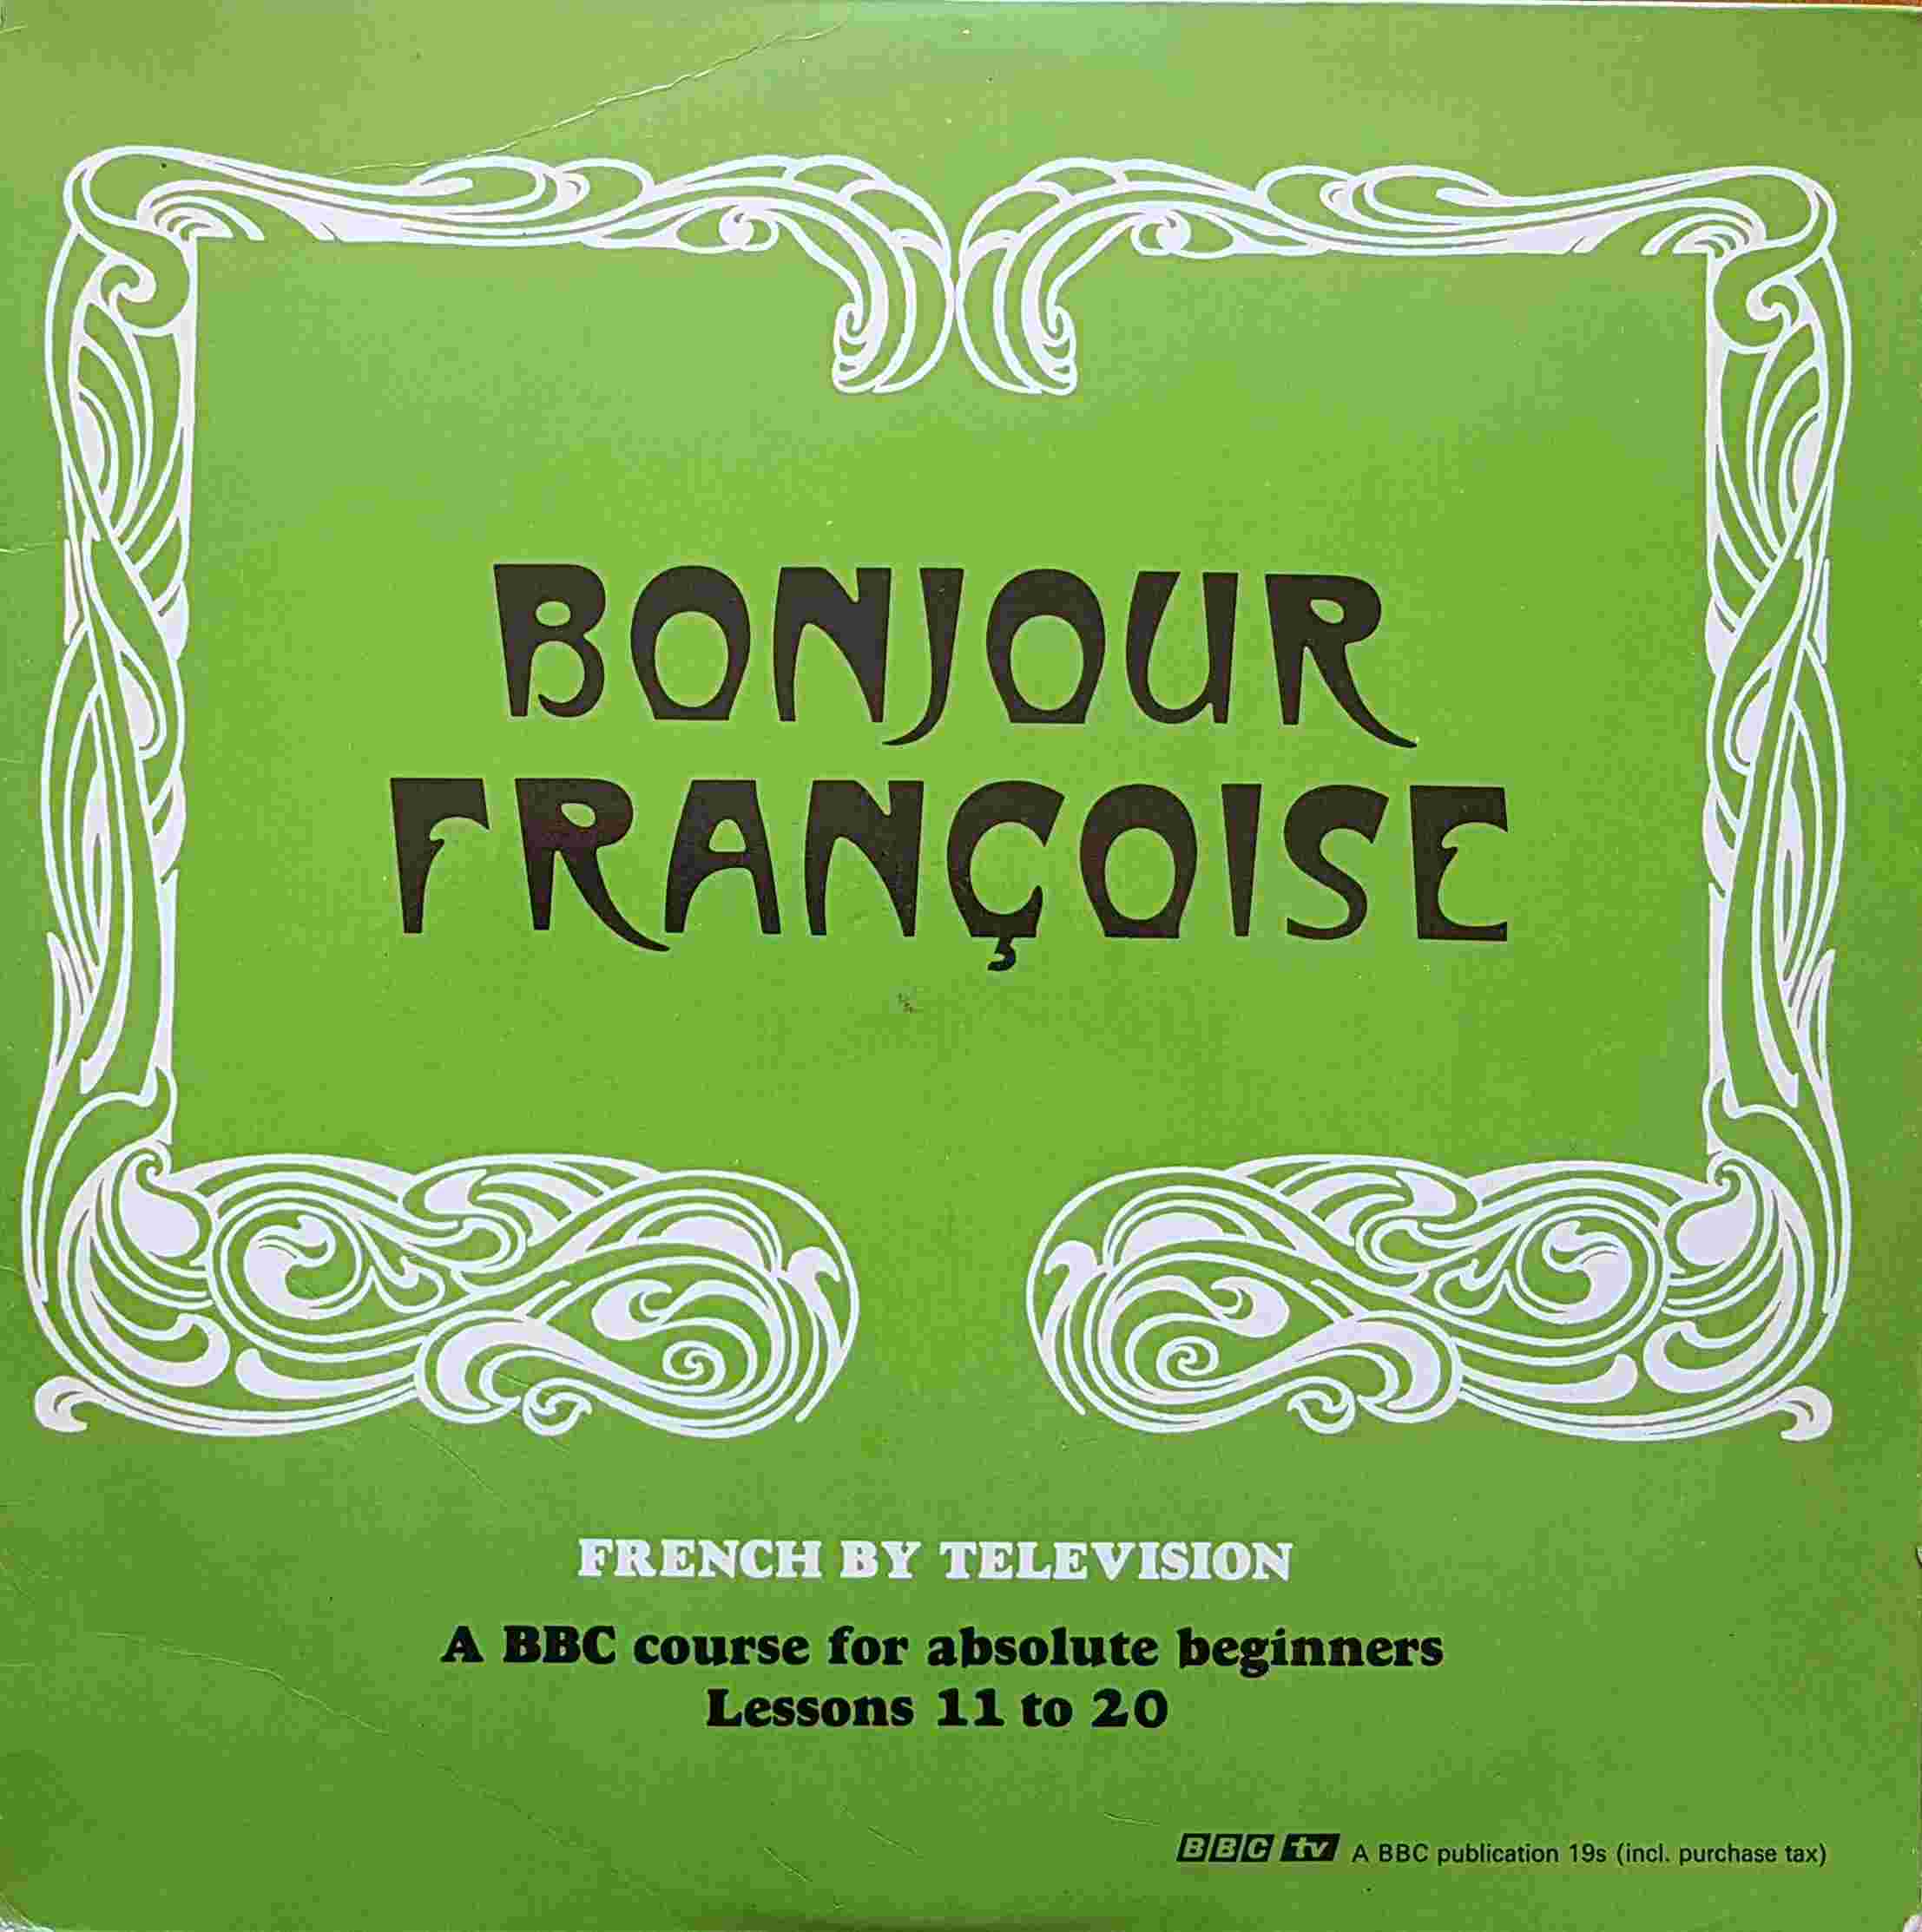 Picture of OP 43/44 Bonjour francoise - French for absolute beginners - Lessons 11 - 20 by artist Michel Faure / Joseph Cremona / A. C. Gimson from the BBC albums - Records and Tapes library